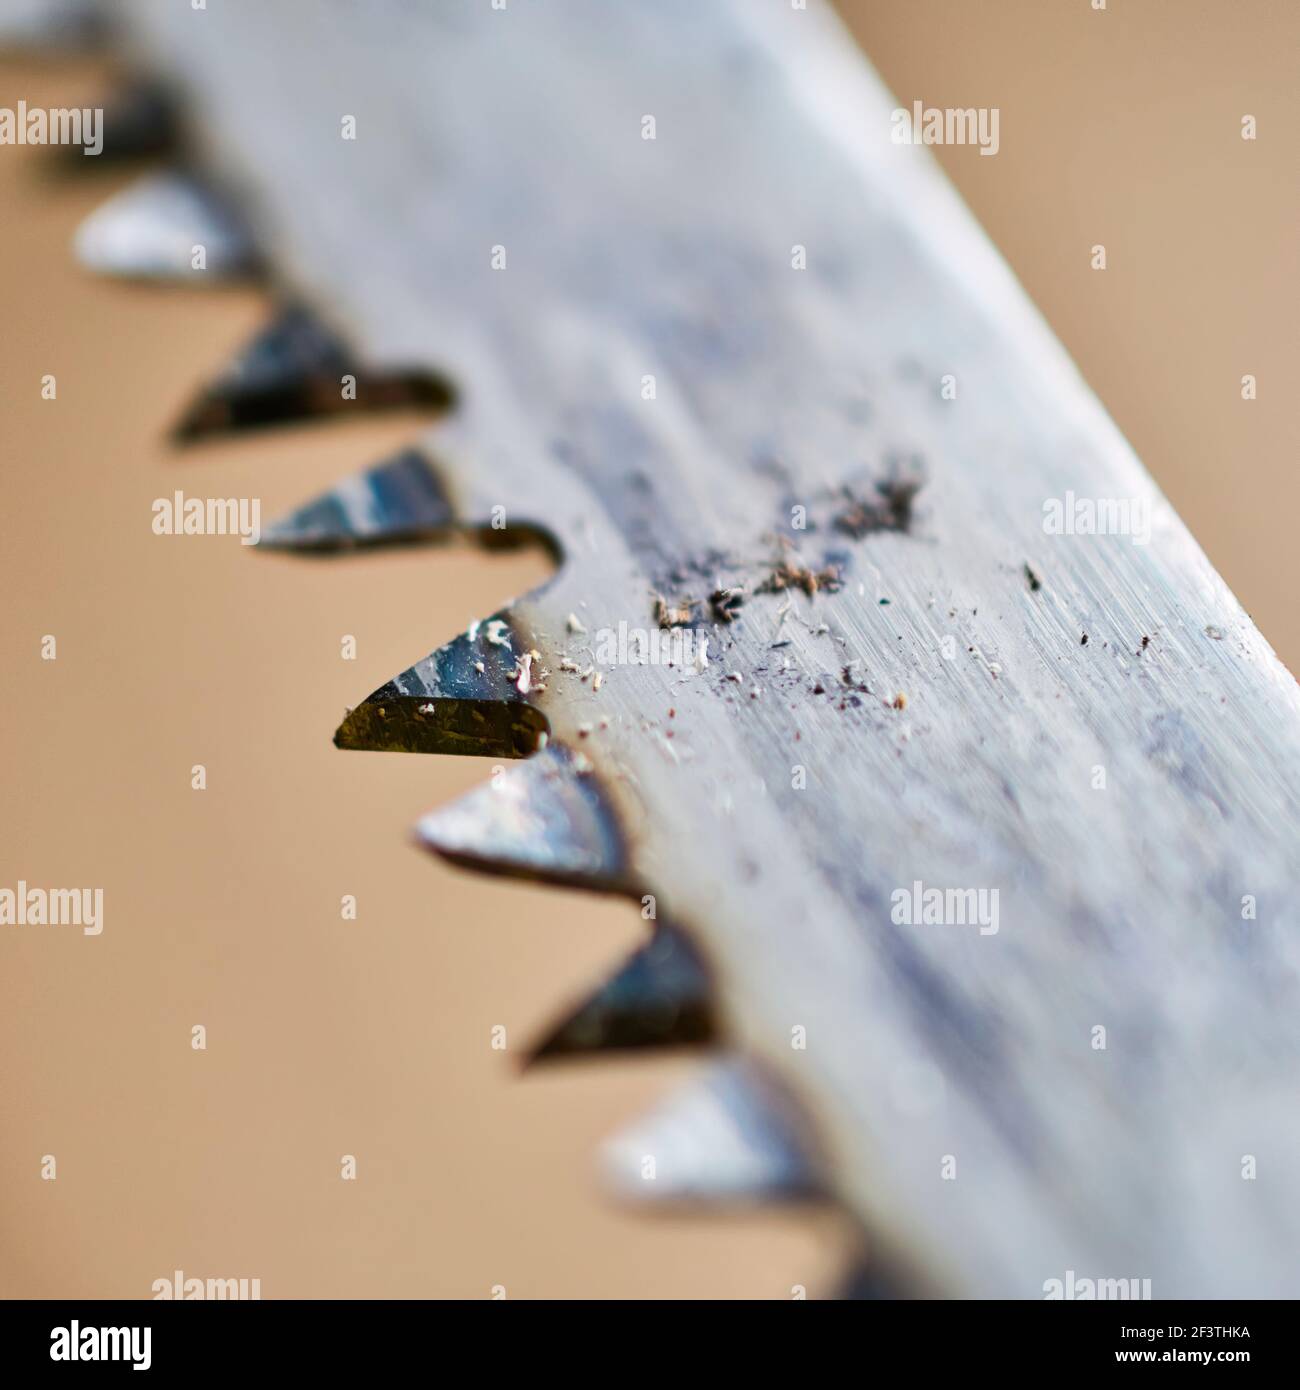 Sawdust remains on the blade of a pruning saw after a cut Stock Photo